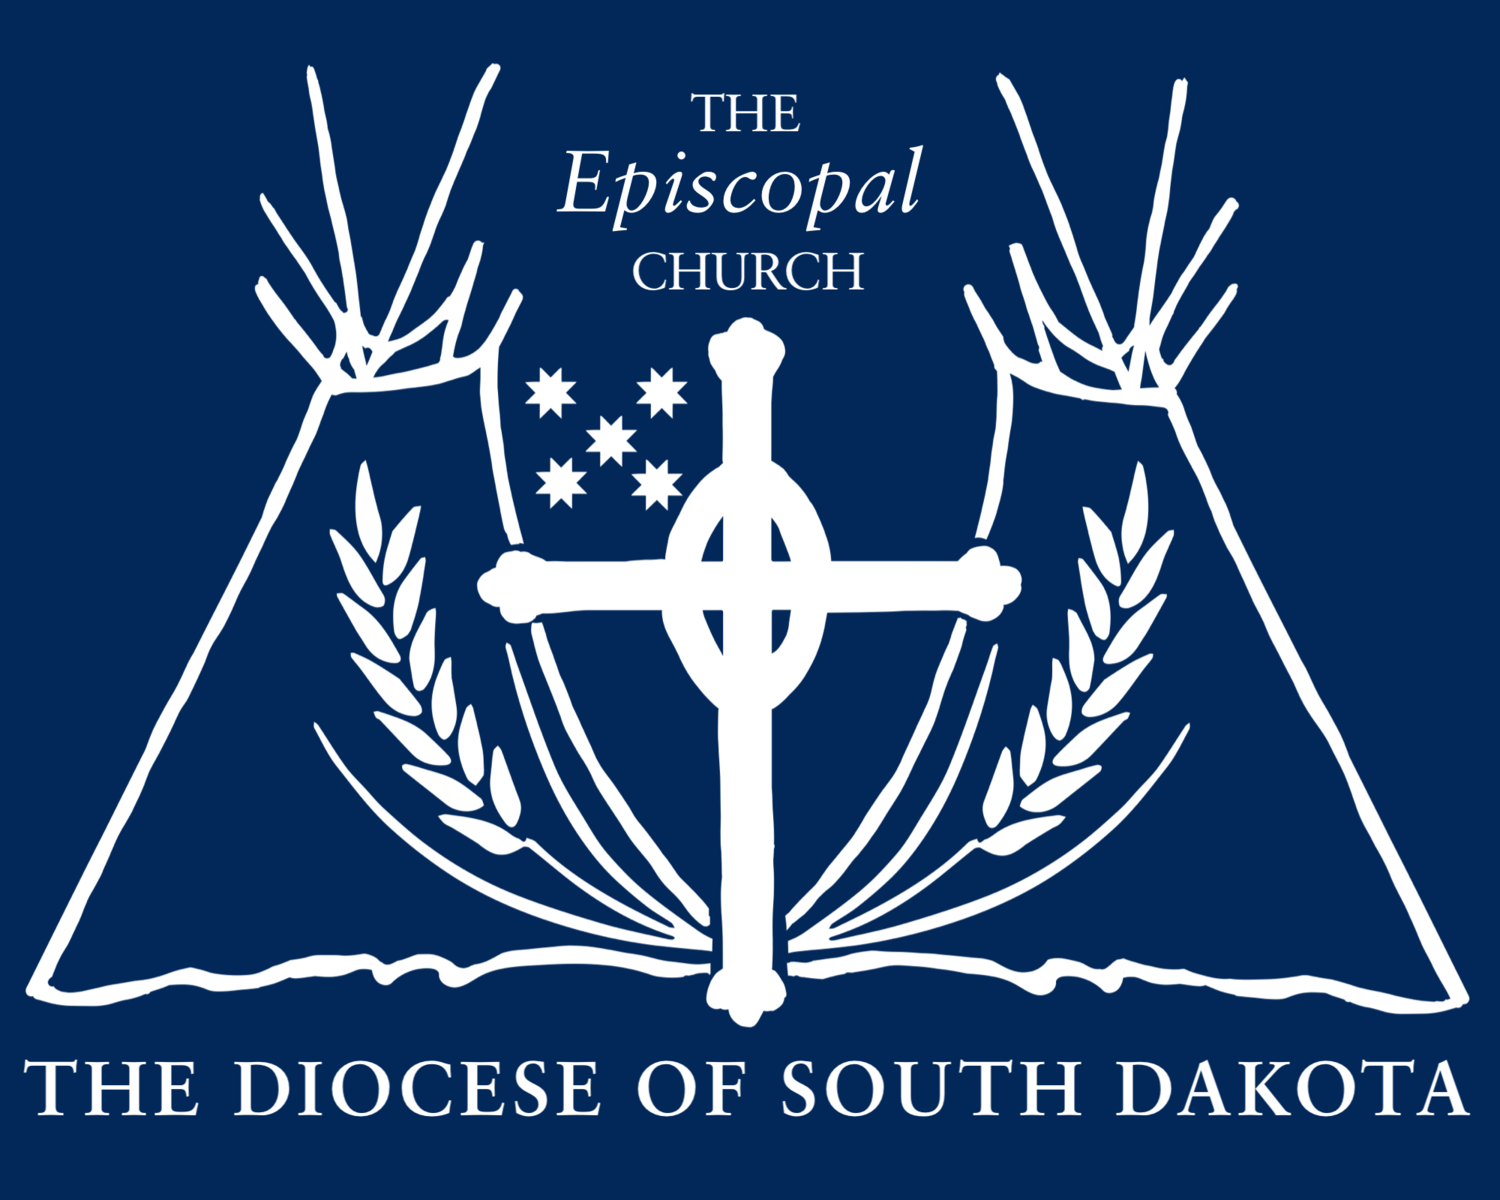 The Episcopal Diocese of South Dakota